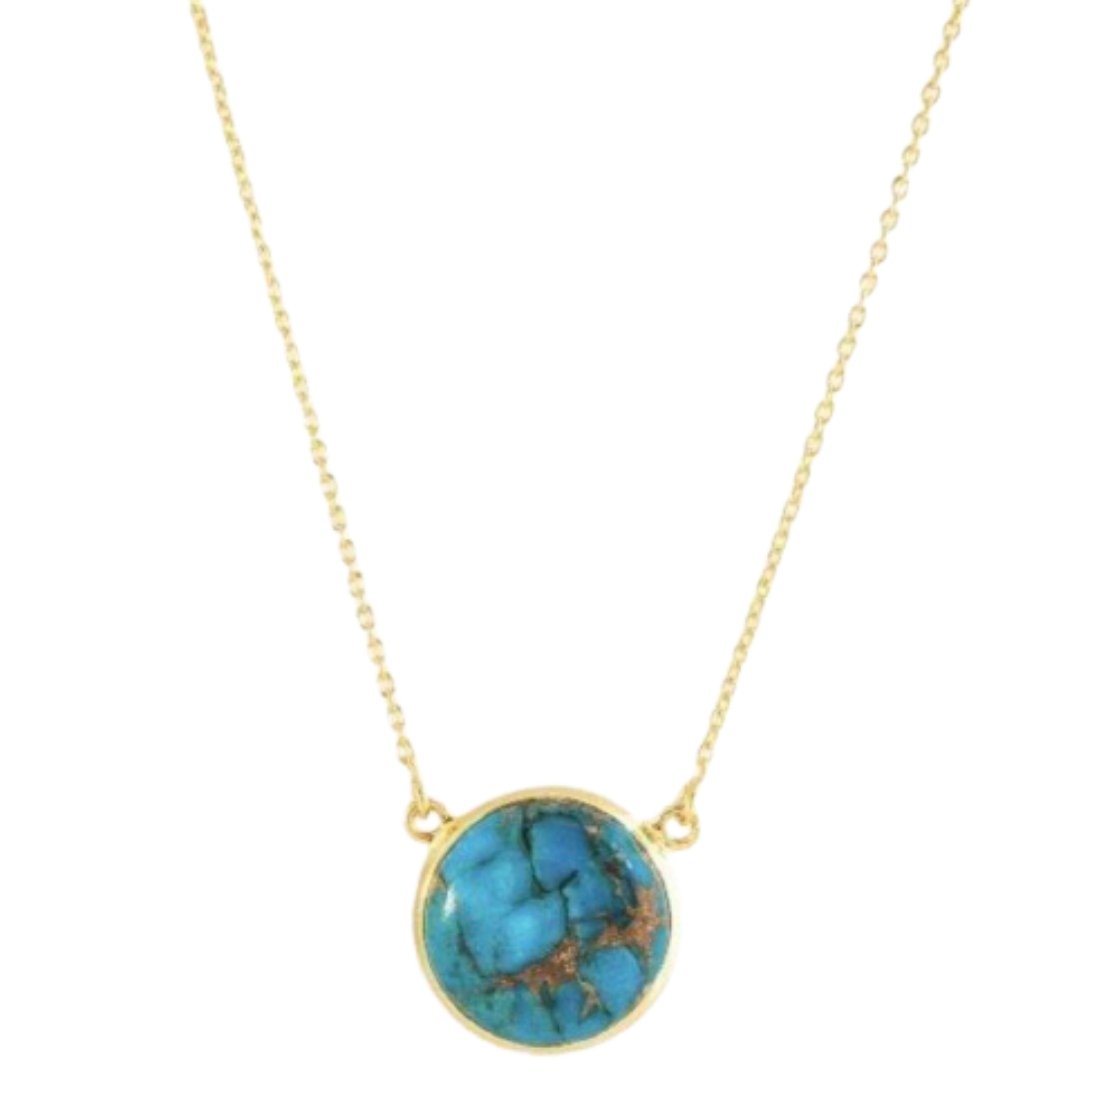 Image of Copper Turquoise Necklace/18k Yellow Gold Vermeil in Copper Turquoise